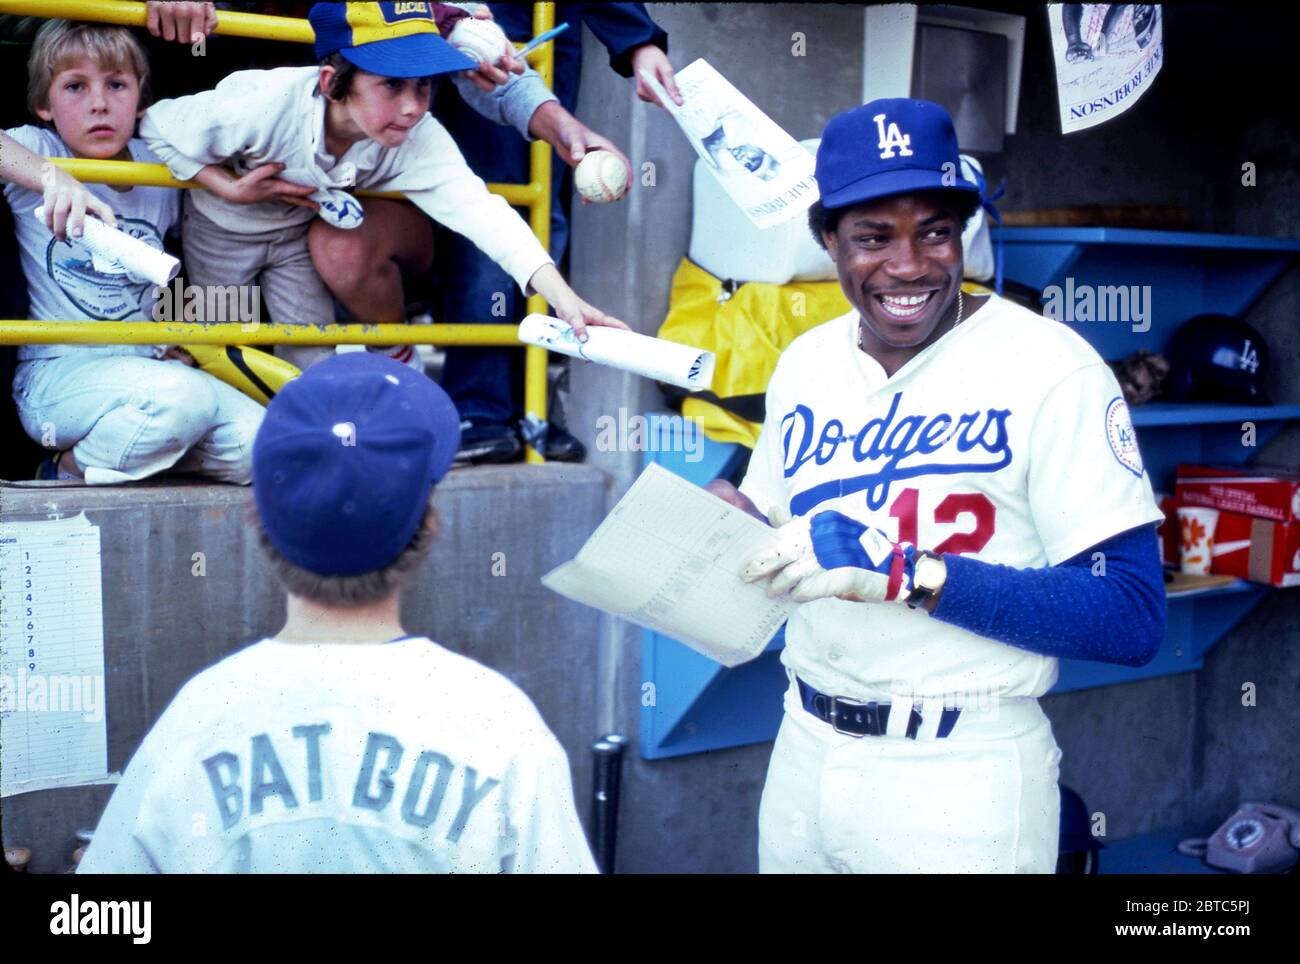 los-angles-dodgers-player-dusty-baker-signing-autographs-for-kids-at-a-special-exhibition-game-between-the-dodgers-and-ucla-bruins-college-team-at-the-newly-christened-jackie-robinson-stadium-in-westwood-ca-2BTC5PJ.jpg